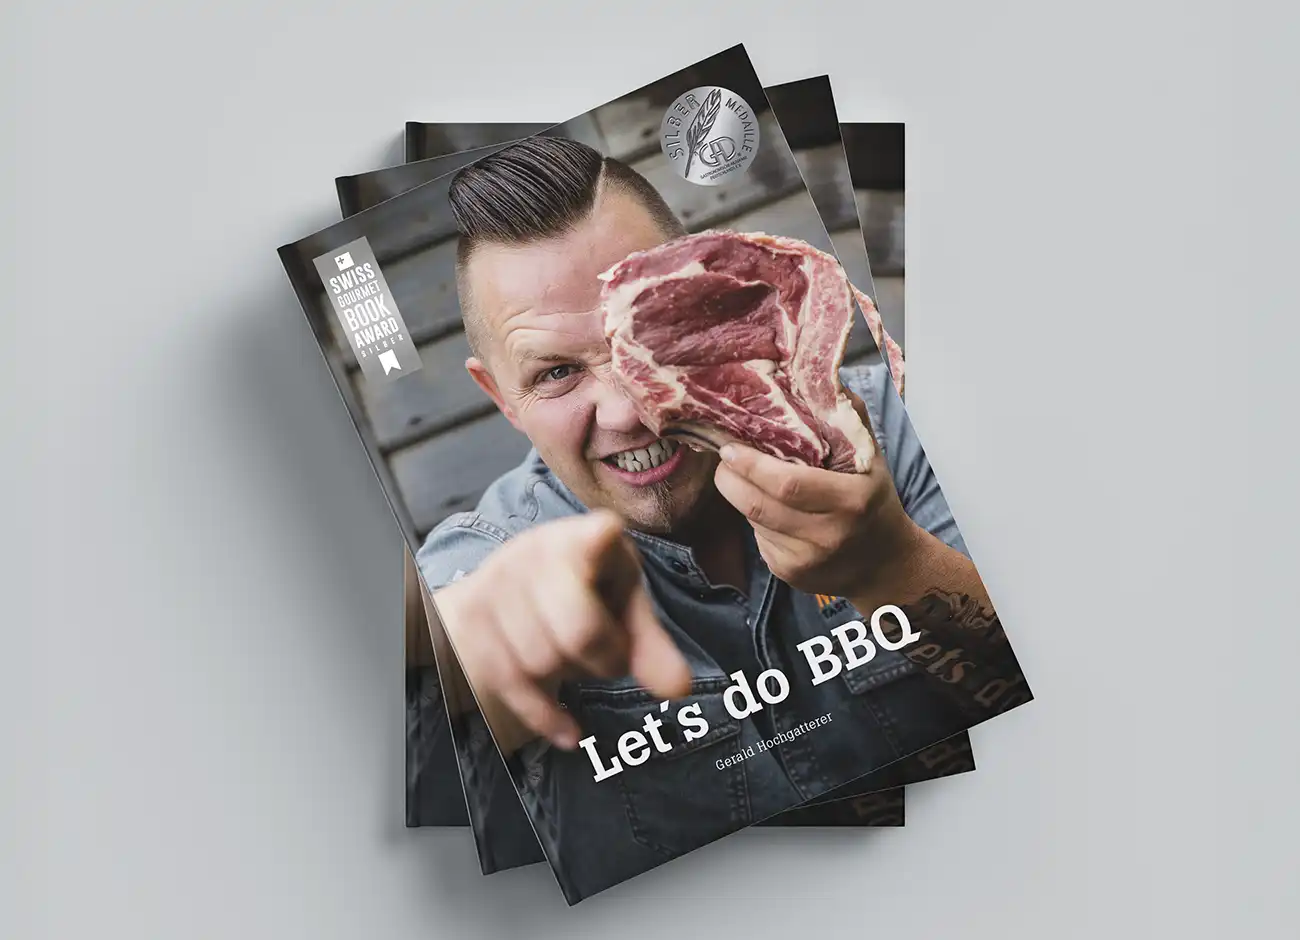 Cooklounge - Let's Do BBQ - Grillbuch